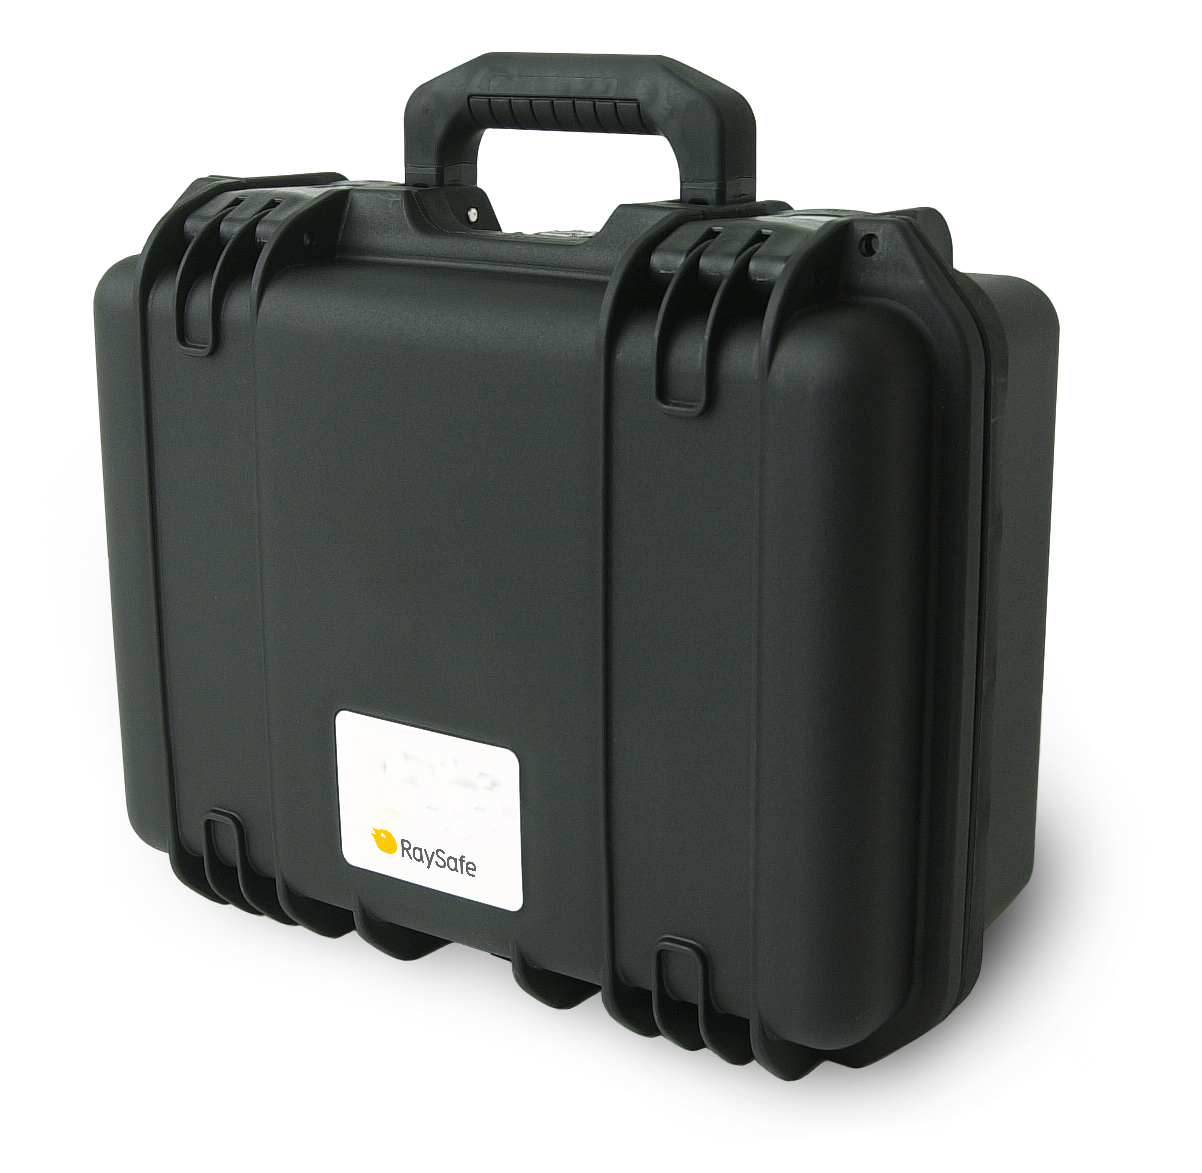 Product image for RaySafe Xi Storm case